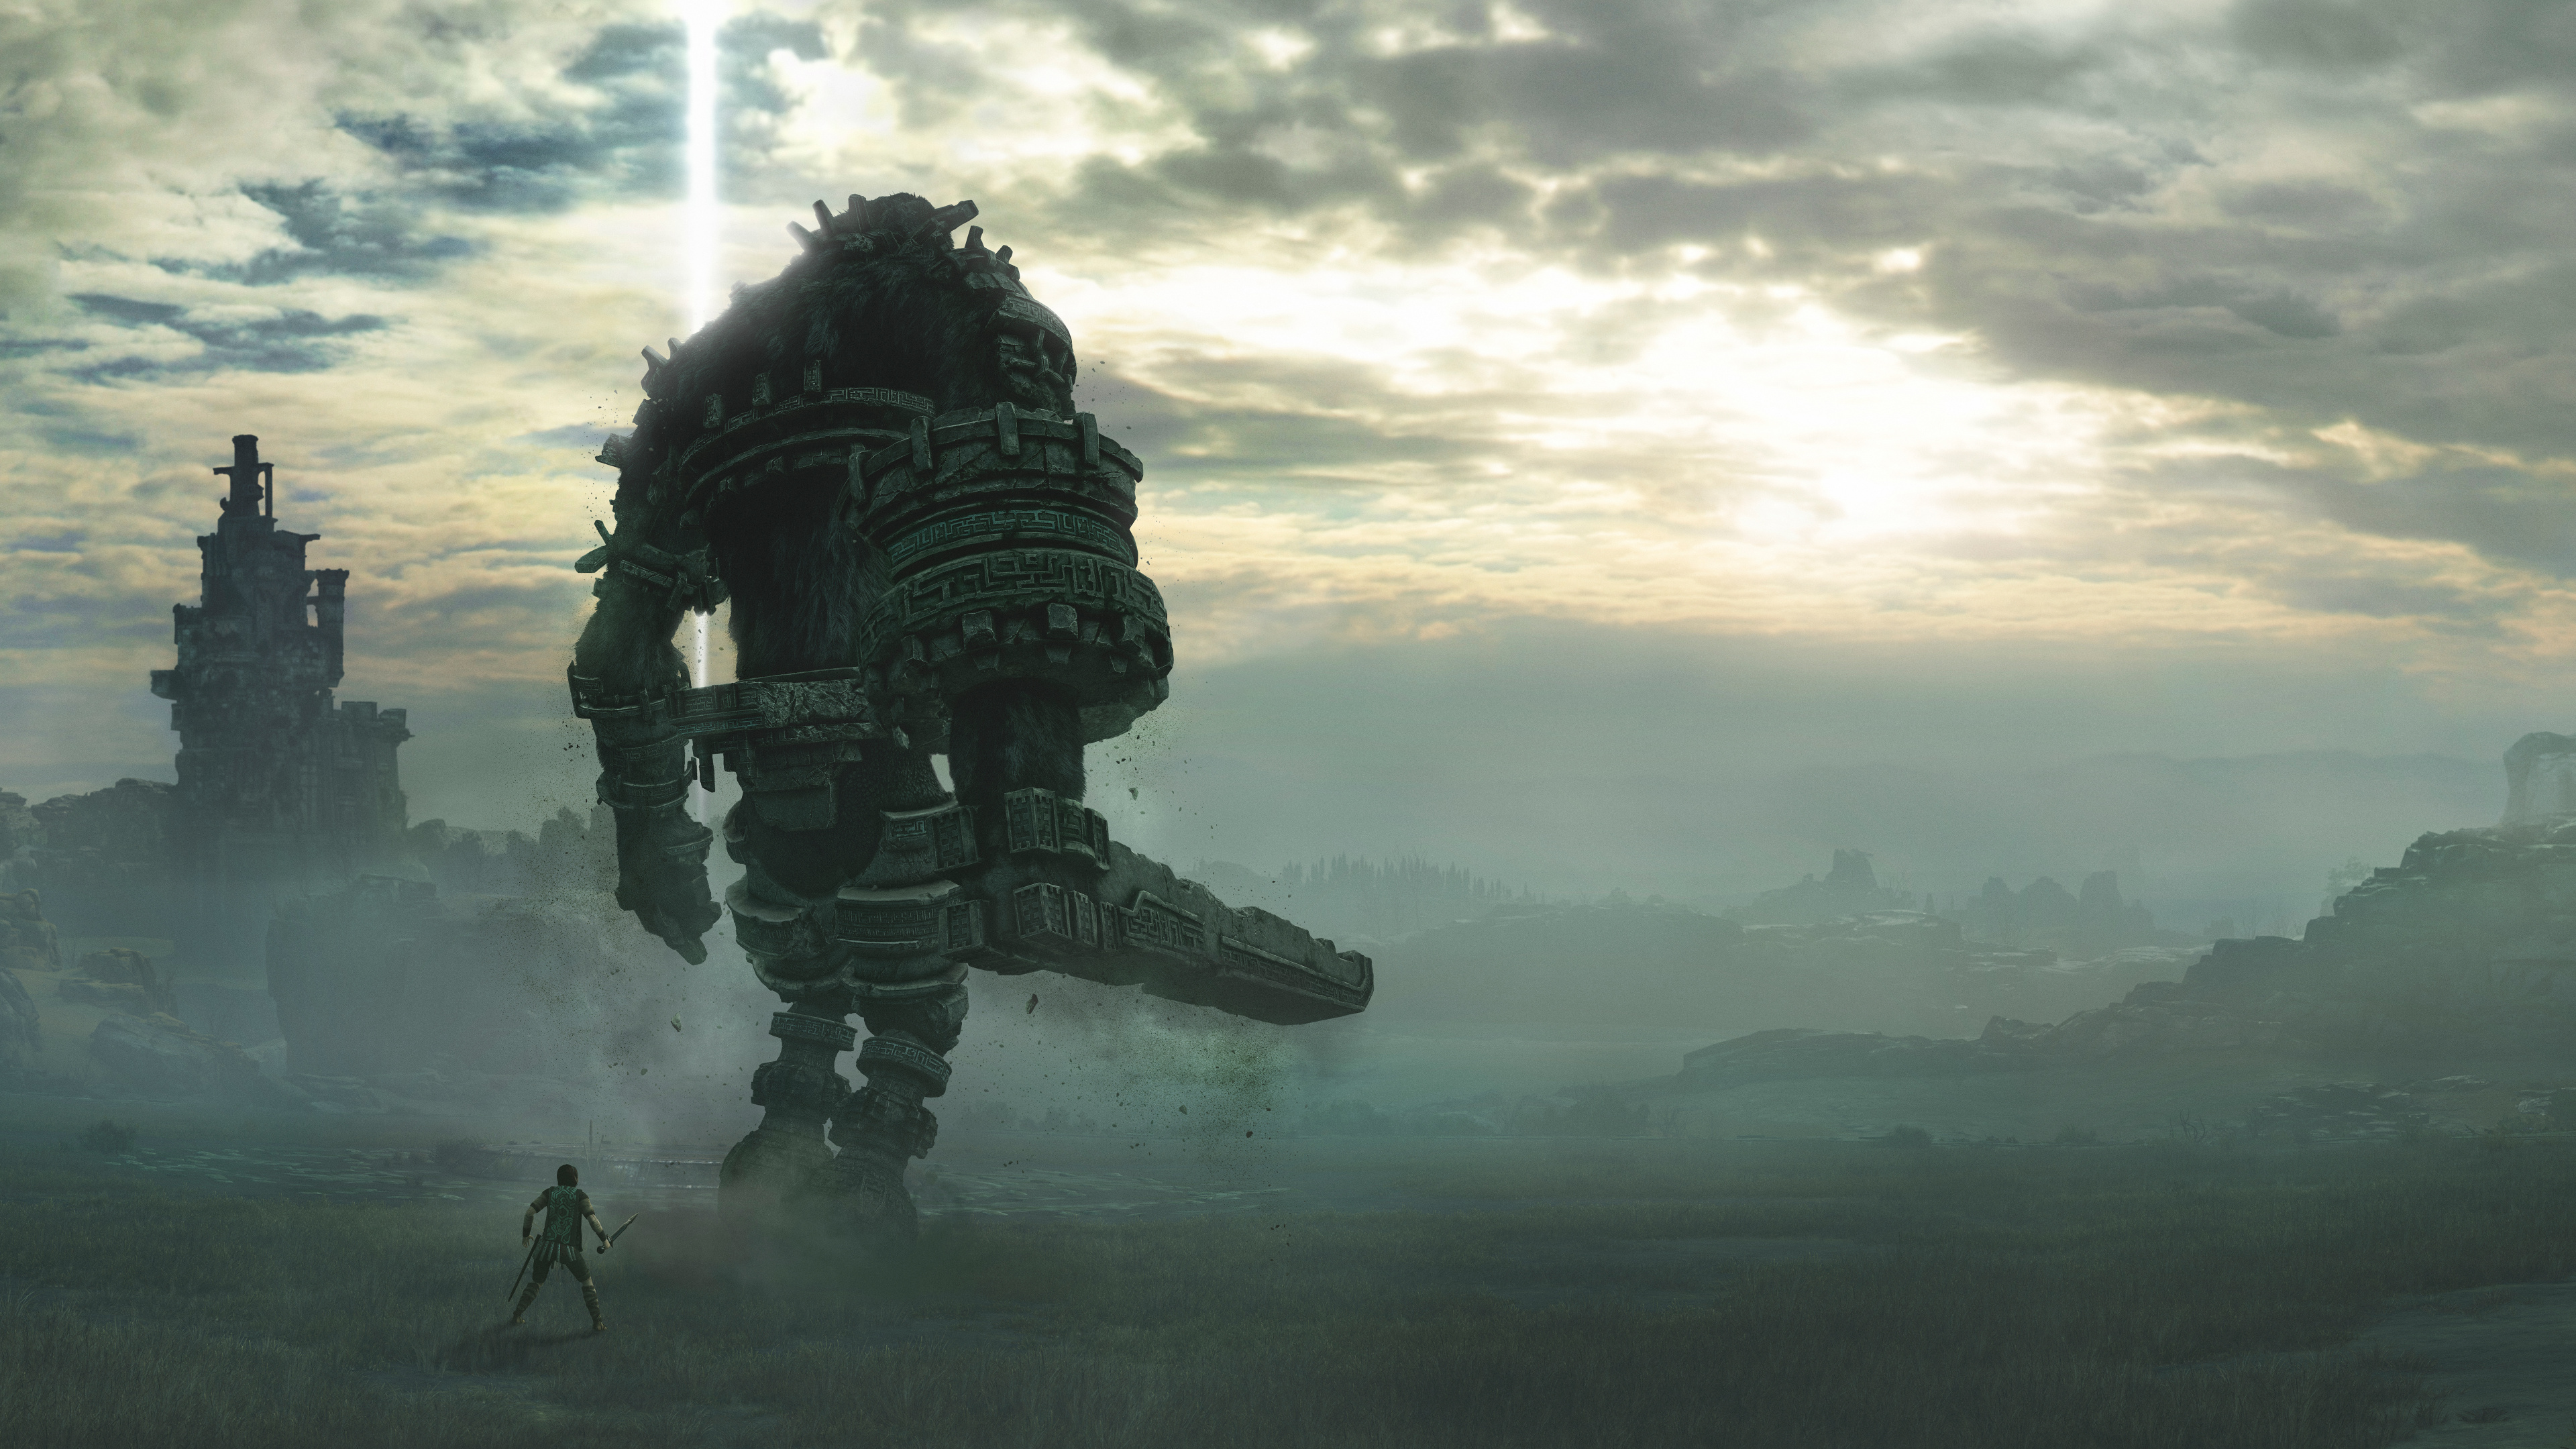 Black and Gray Robot on Green Grass Field During Daytime. Wallpaper in 3840x2160 Resolution